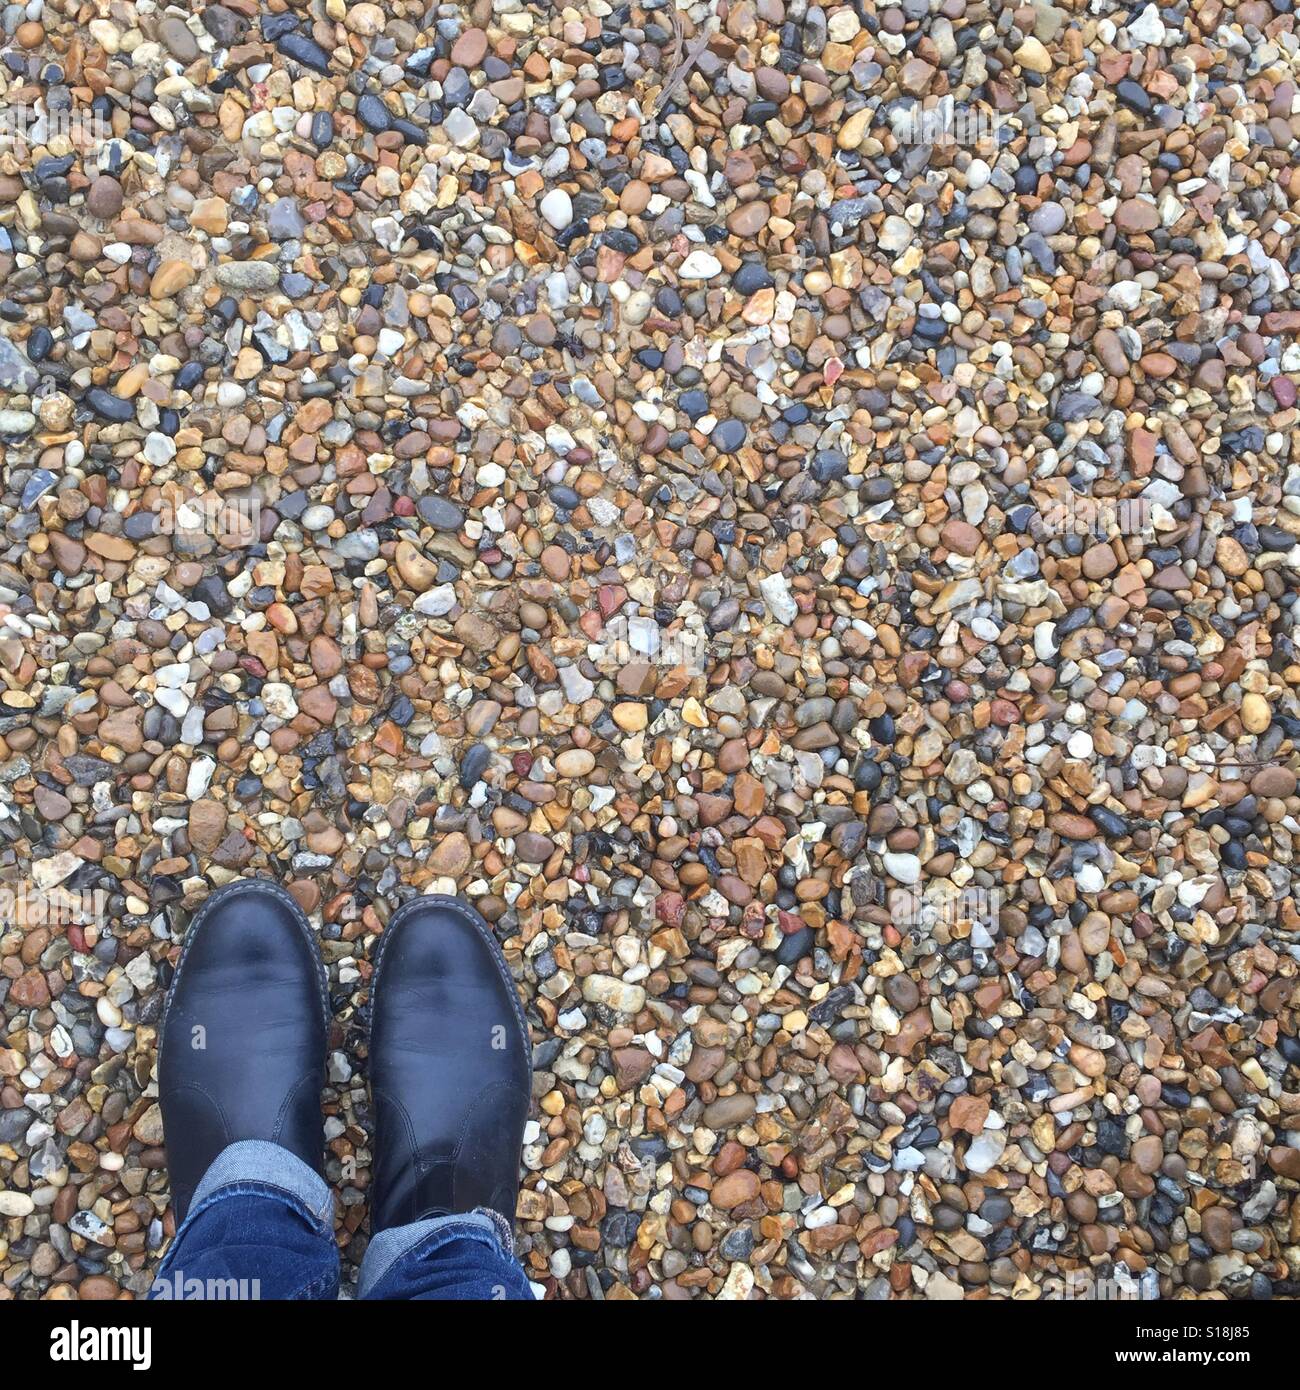 Pebbles background with man standing wearing Chelsea boots. Stock Photo